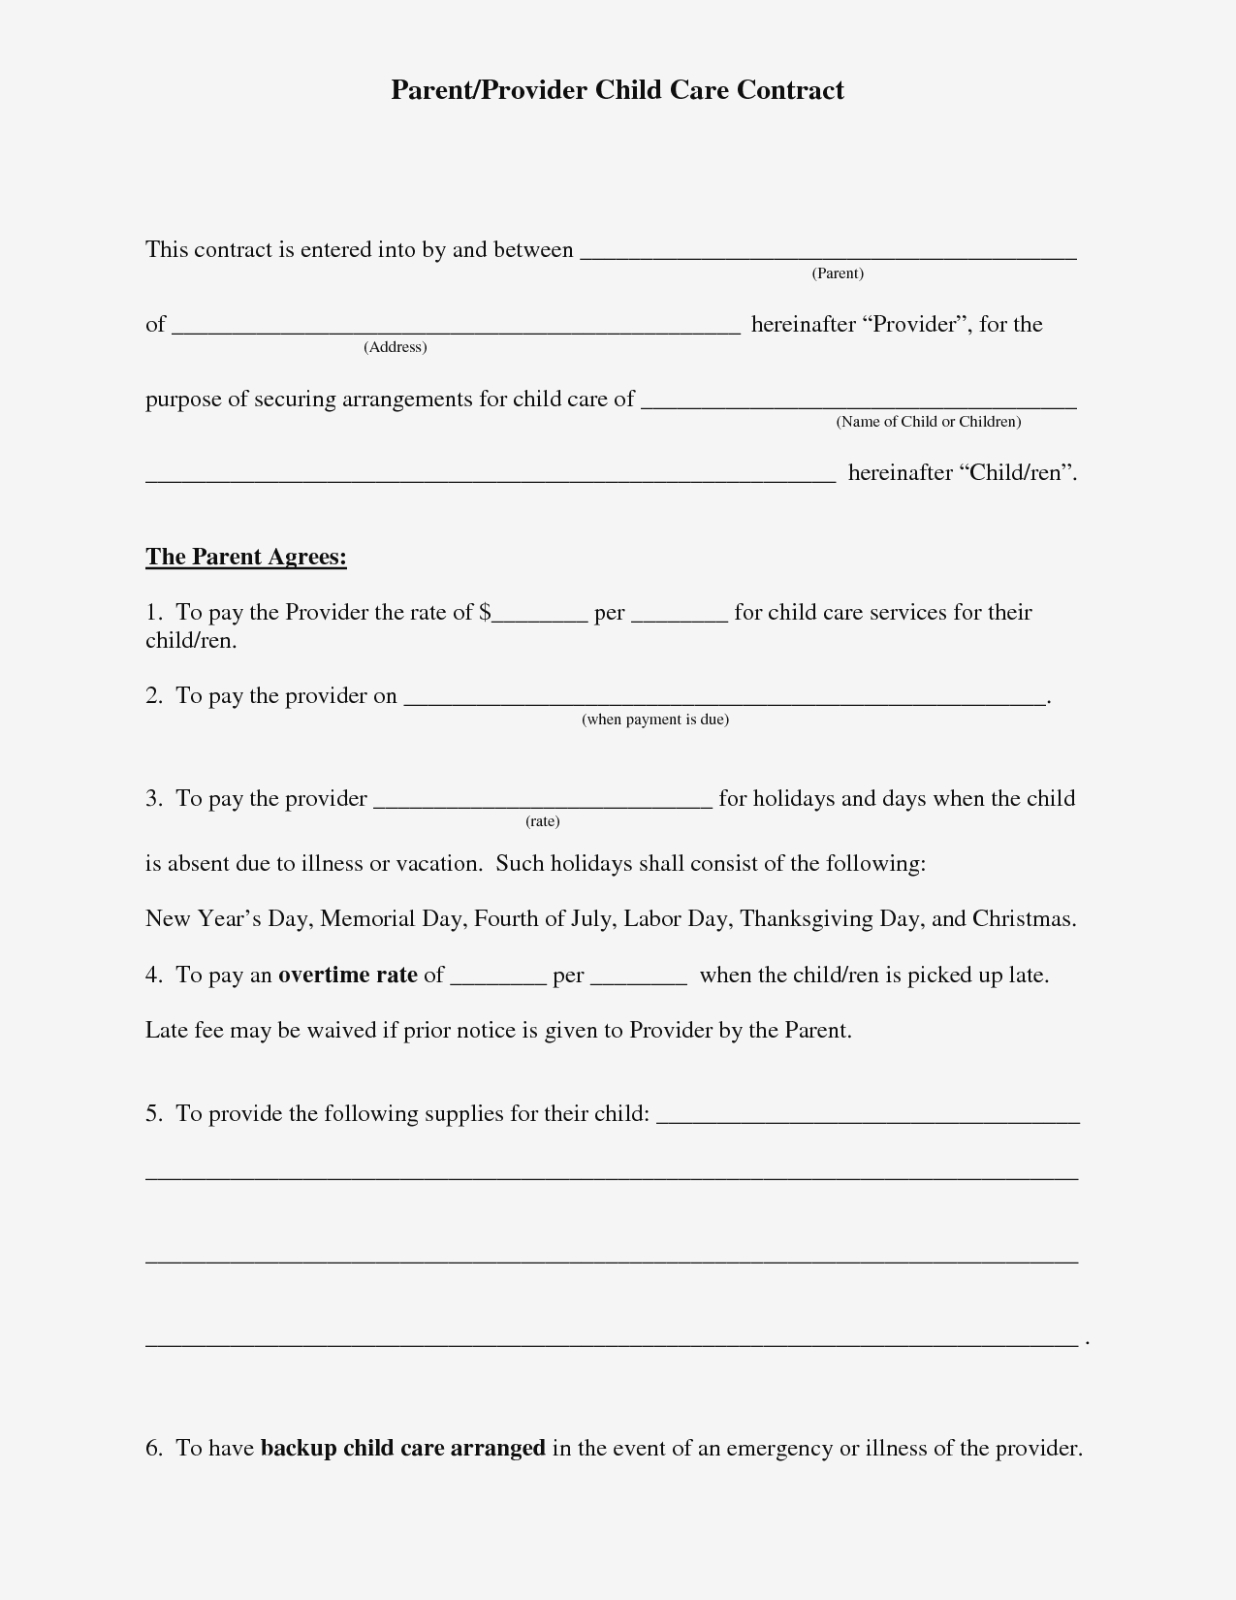 Free Daycare Contract Forms | Daycare Forms | Pinterest | Daycare - Free Printable Daycare Forms For Parents